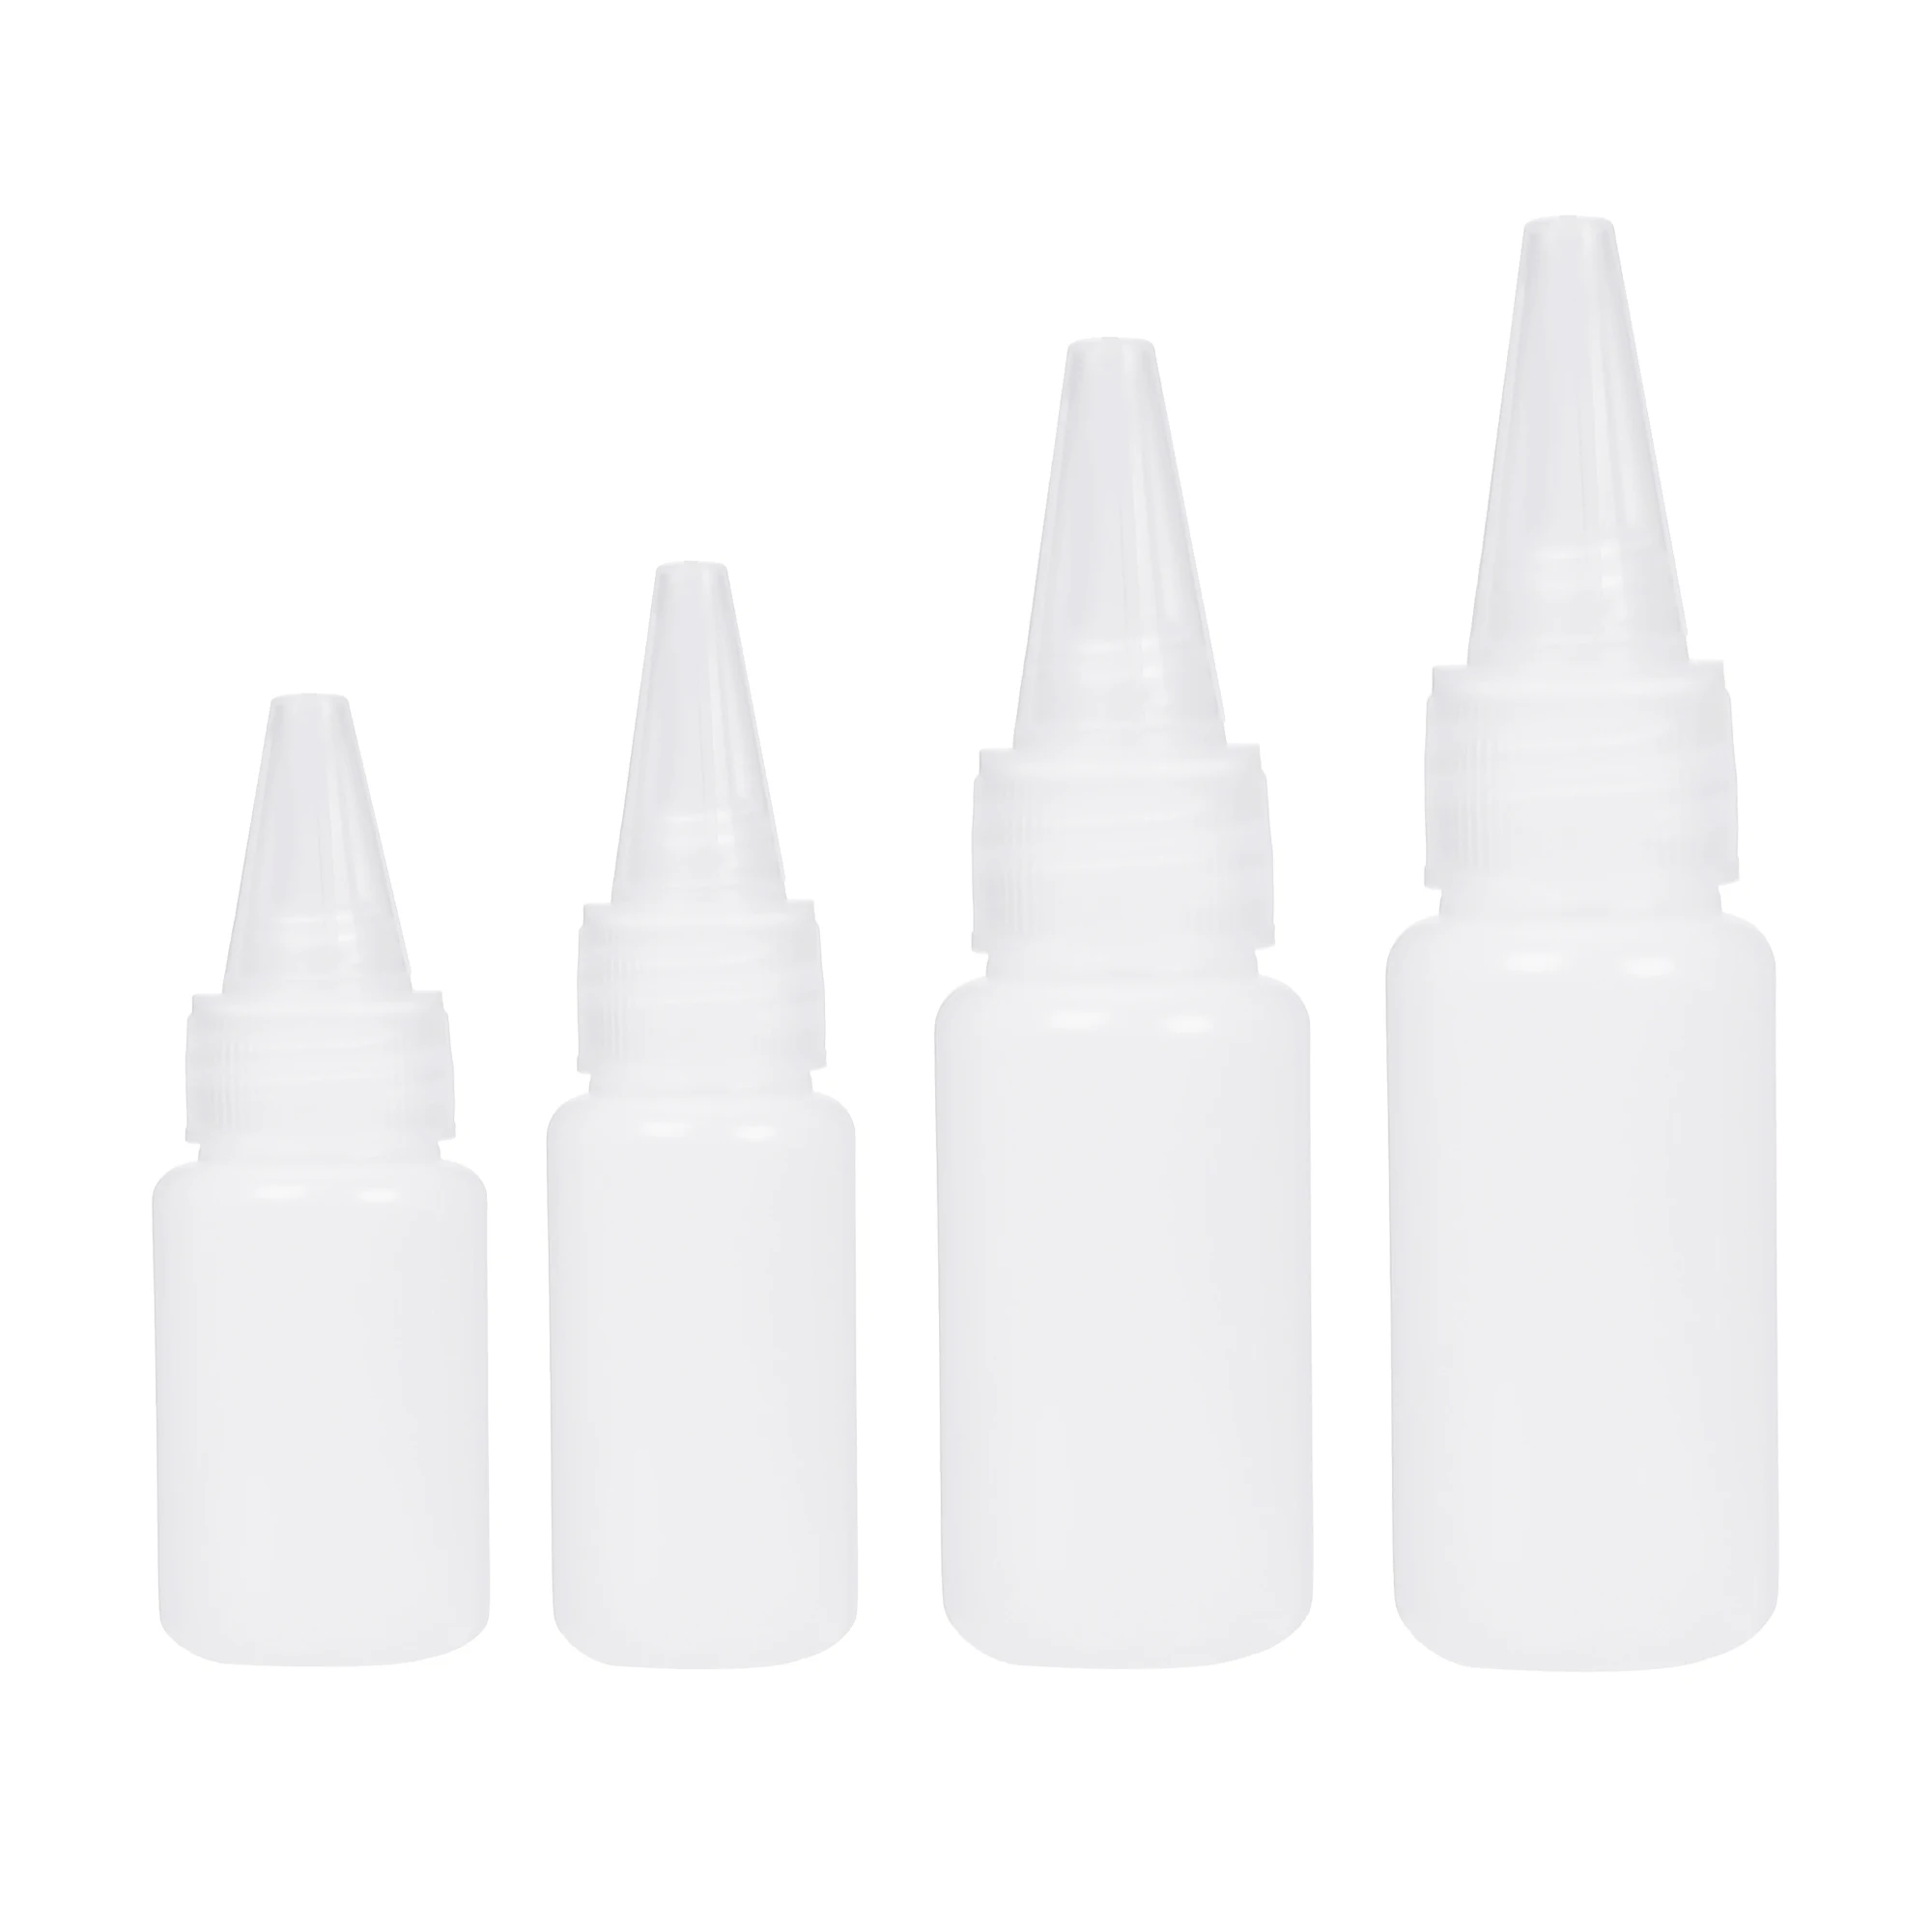 10PCS 10/20/30/50ML Empty PE Plastic Glue Bottles With Screw-on Lid Squeezable Liquid Ink Oil Dropper Bottles Cosmetic Container